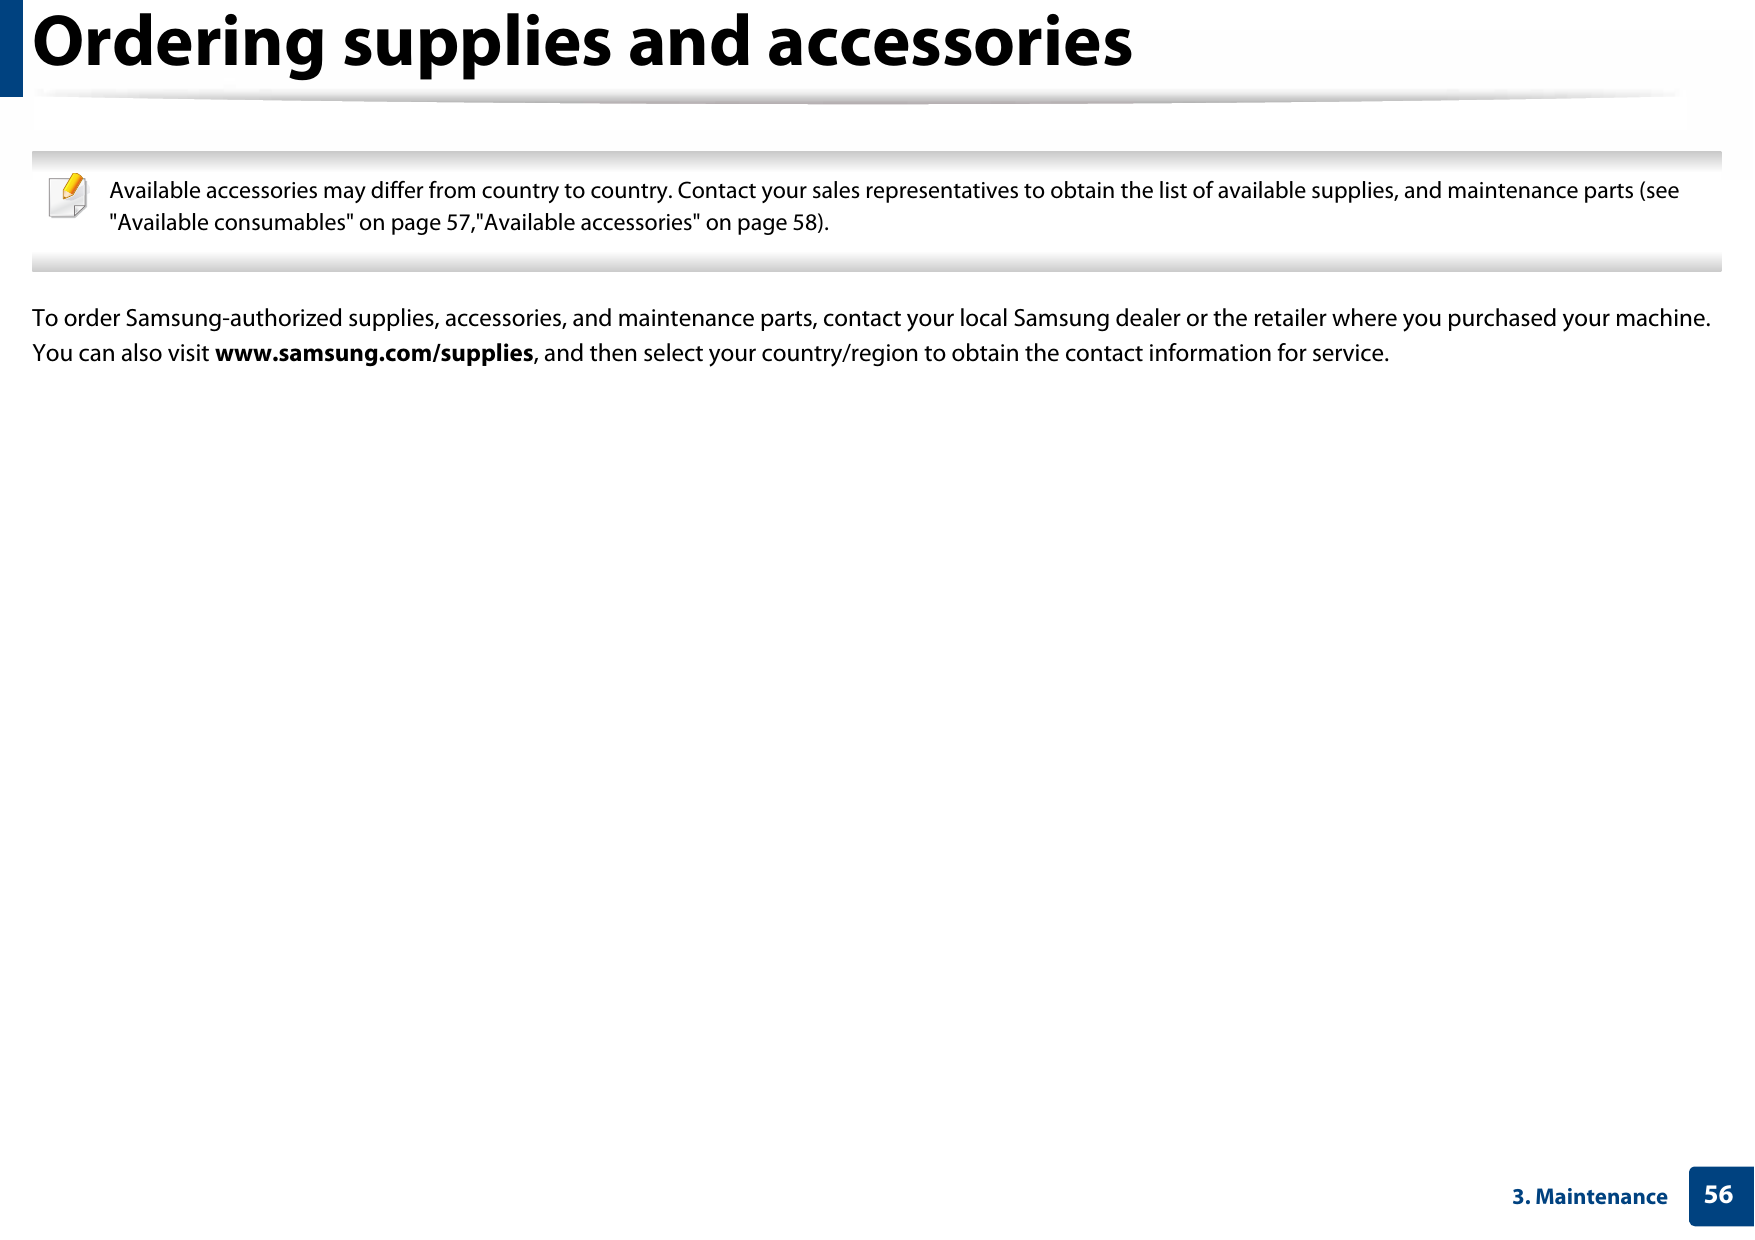 563. MaintenanceOrdering supplies and accessories Available accessories may differ from country to country. Contact your sales representatives to obtain the list of available supplies, and maintenance parts (see &quot;Available consumables&quot; on page 57,&quot;Available accessories&quot; on page 58). To order Samsung-authorized supplies, accessories, and maintenance parts, contact your local Samsung dealer or the retailer where you purchased your machine. You can also visit www.samsung.com/supplies, and then select your country/region to obtain the contact information for service.